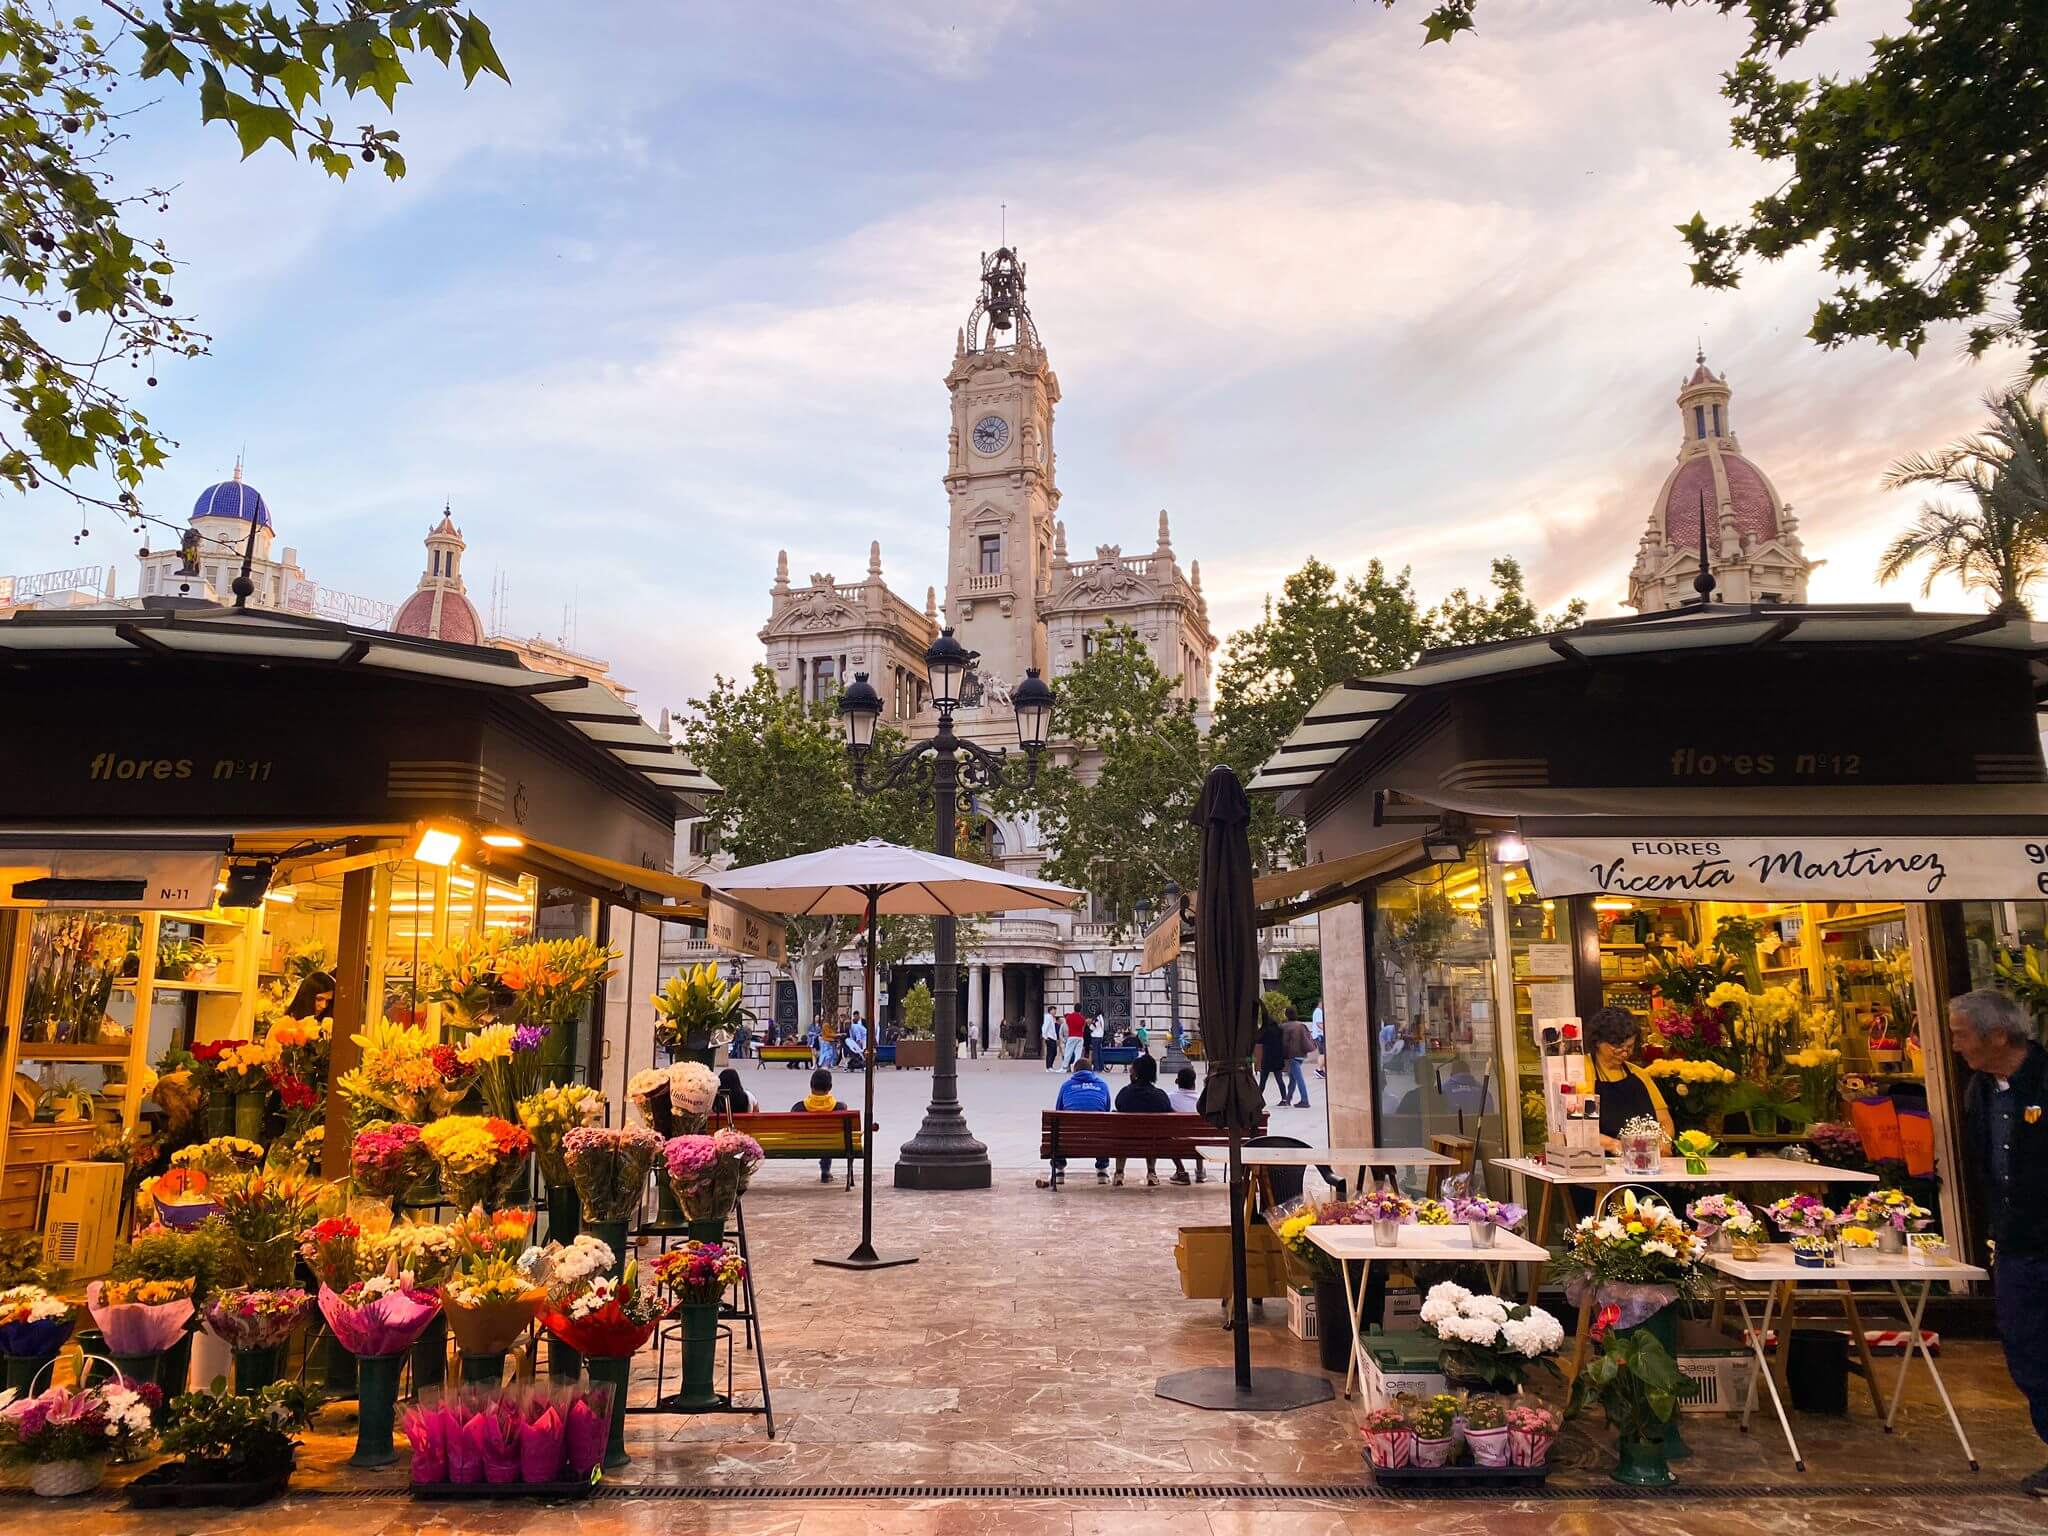 33 epic things to do in Valencia, Spain